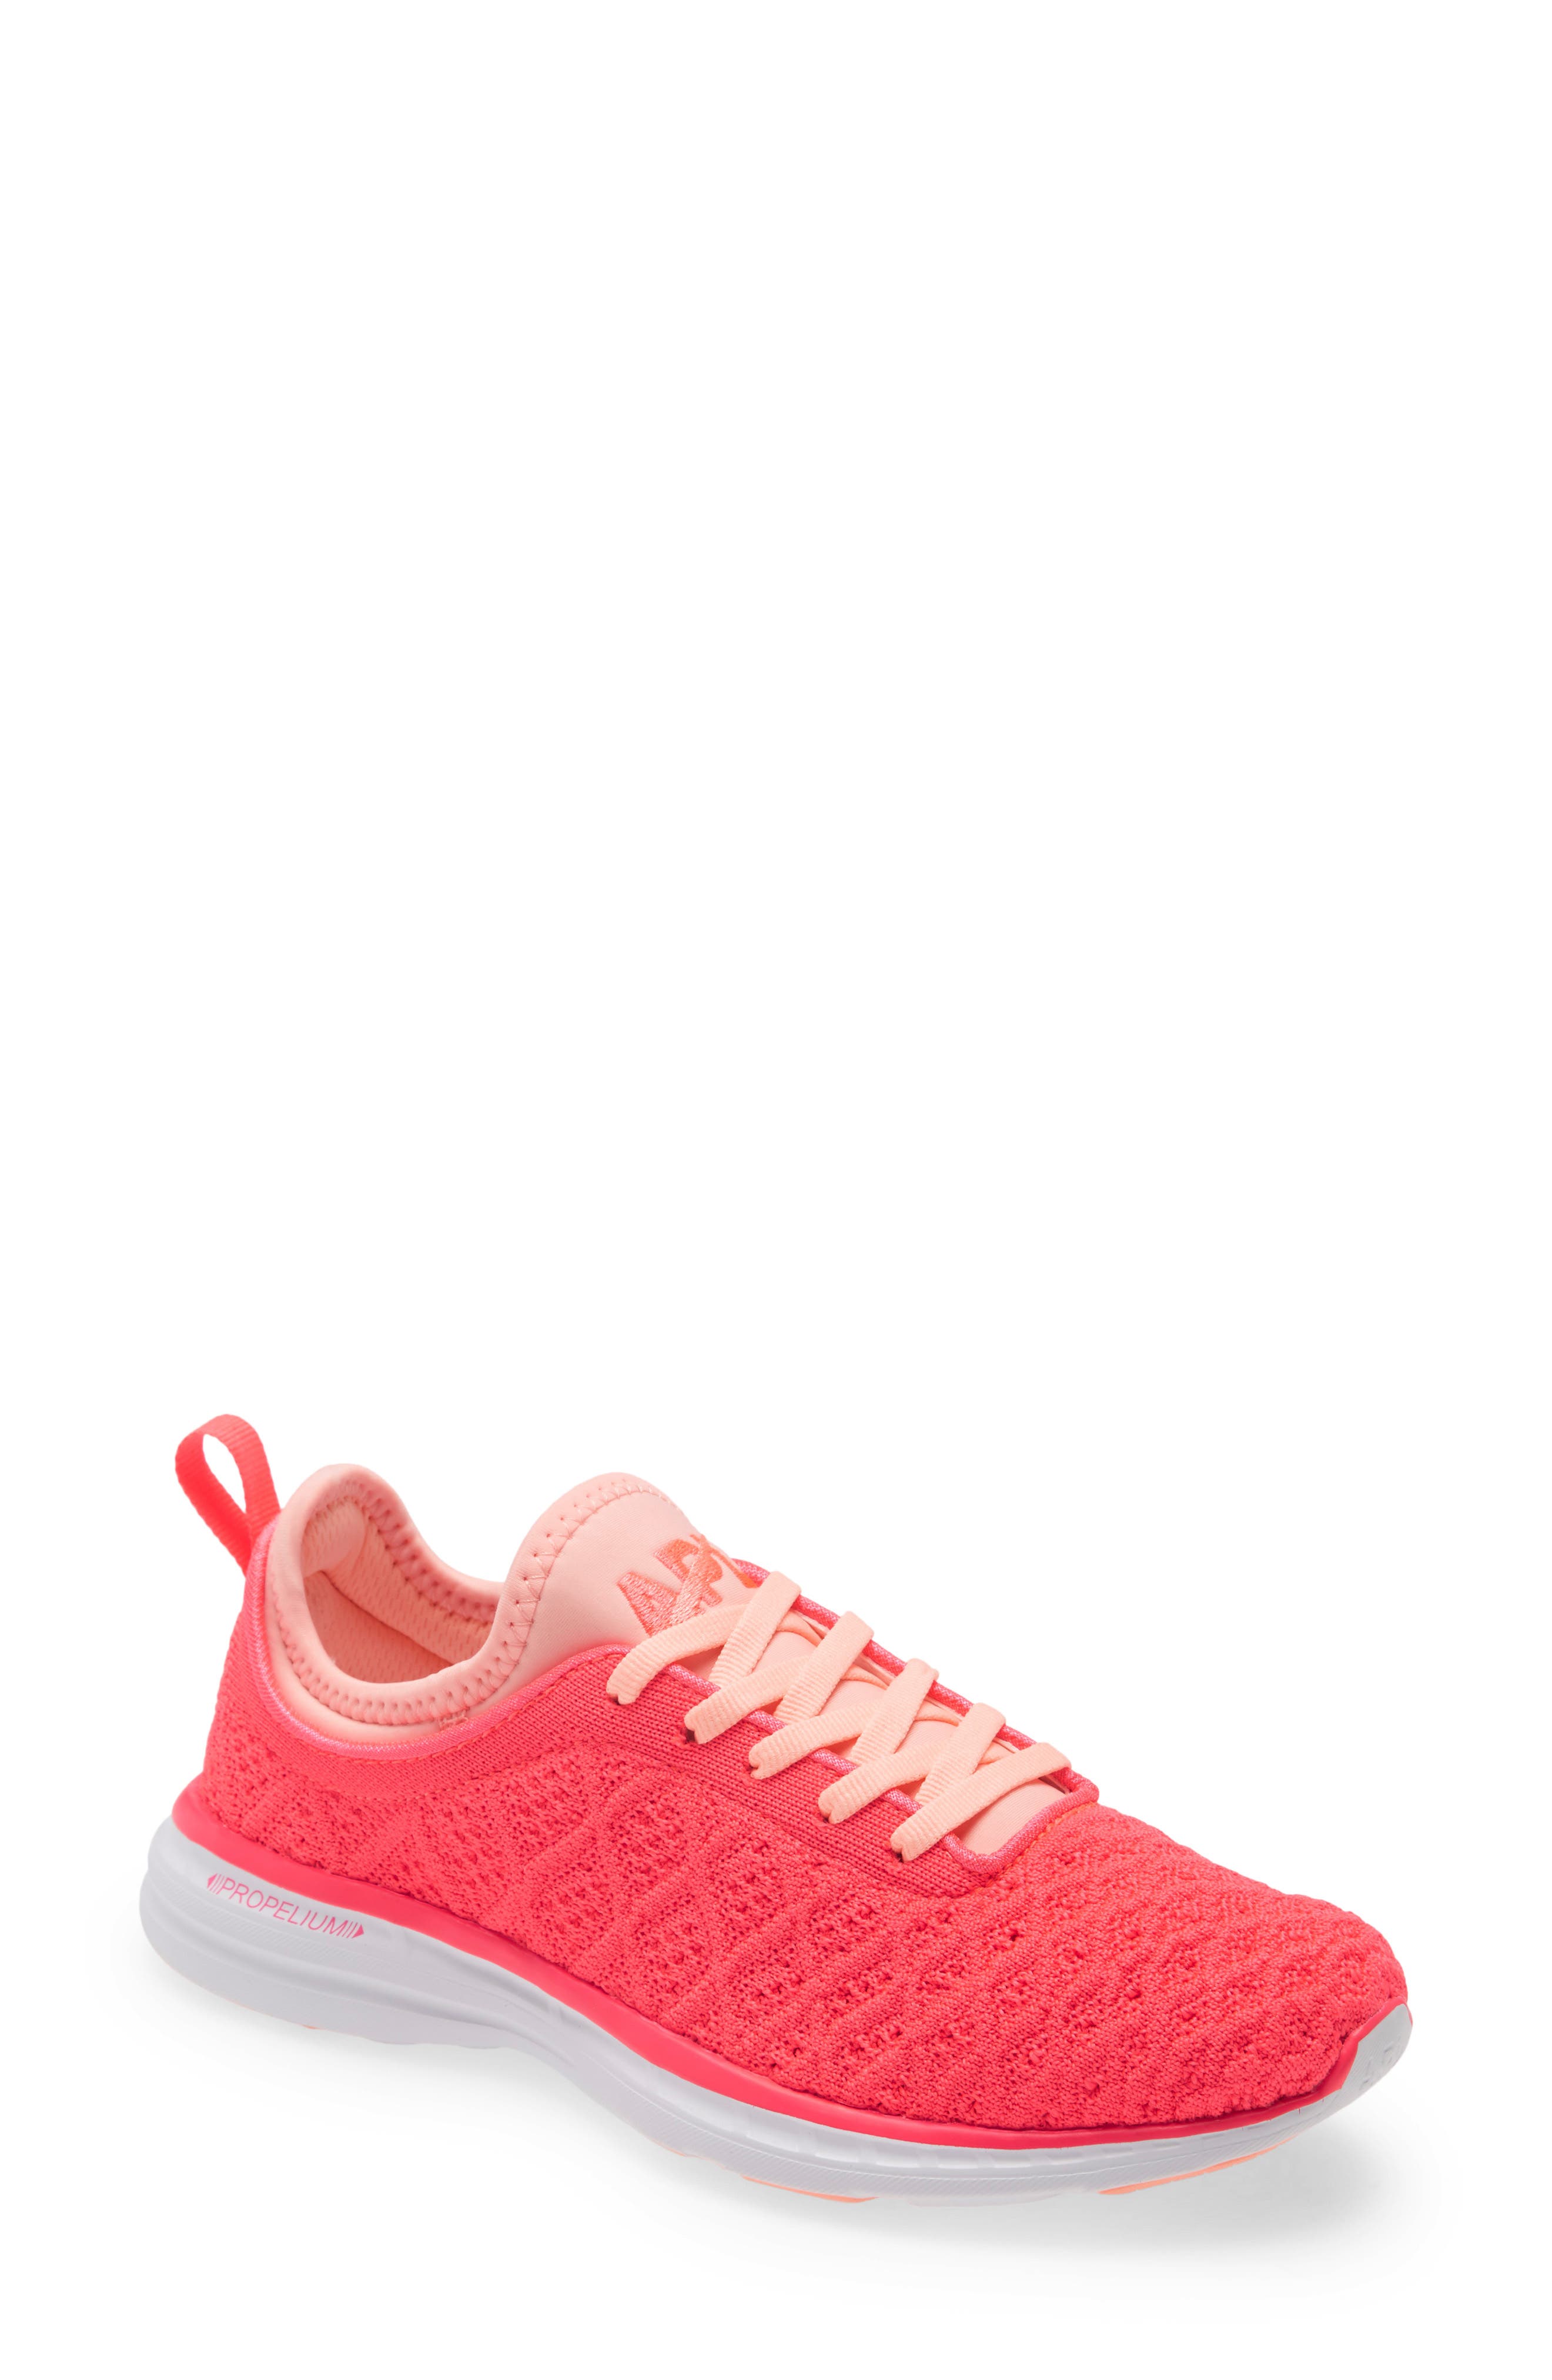 hot pink athletic shoes